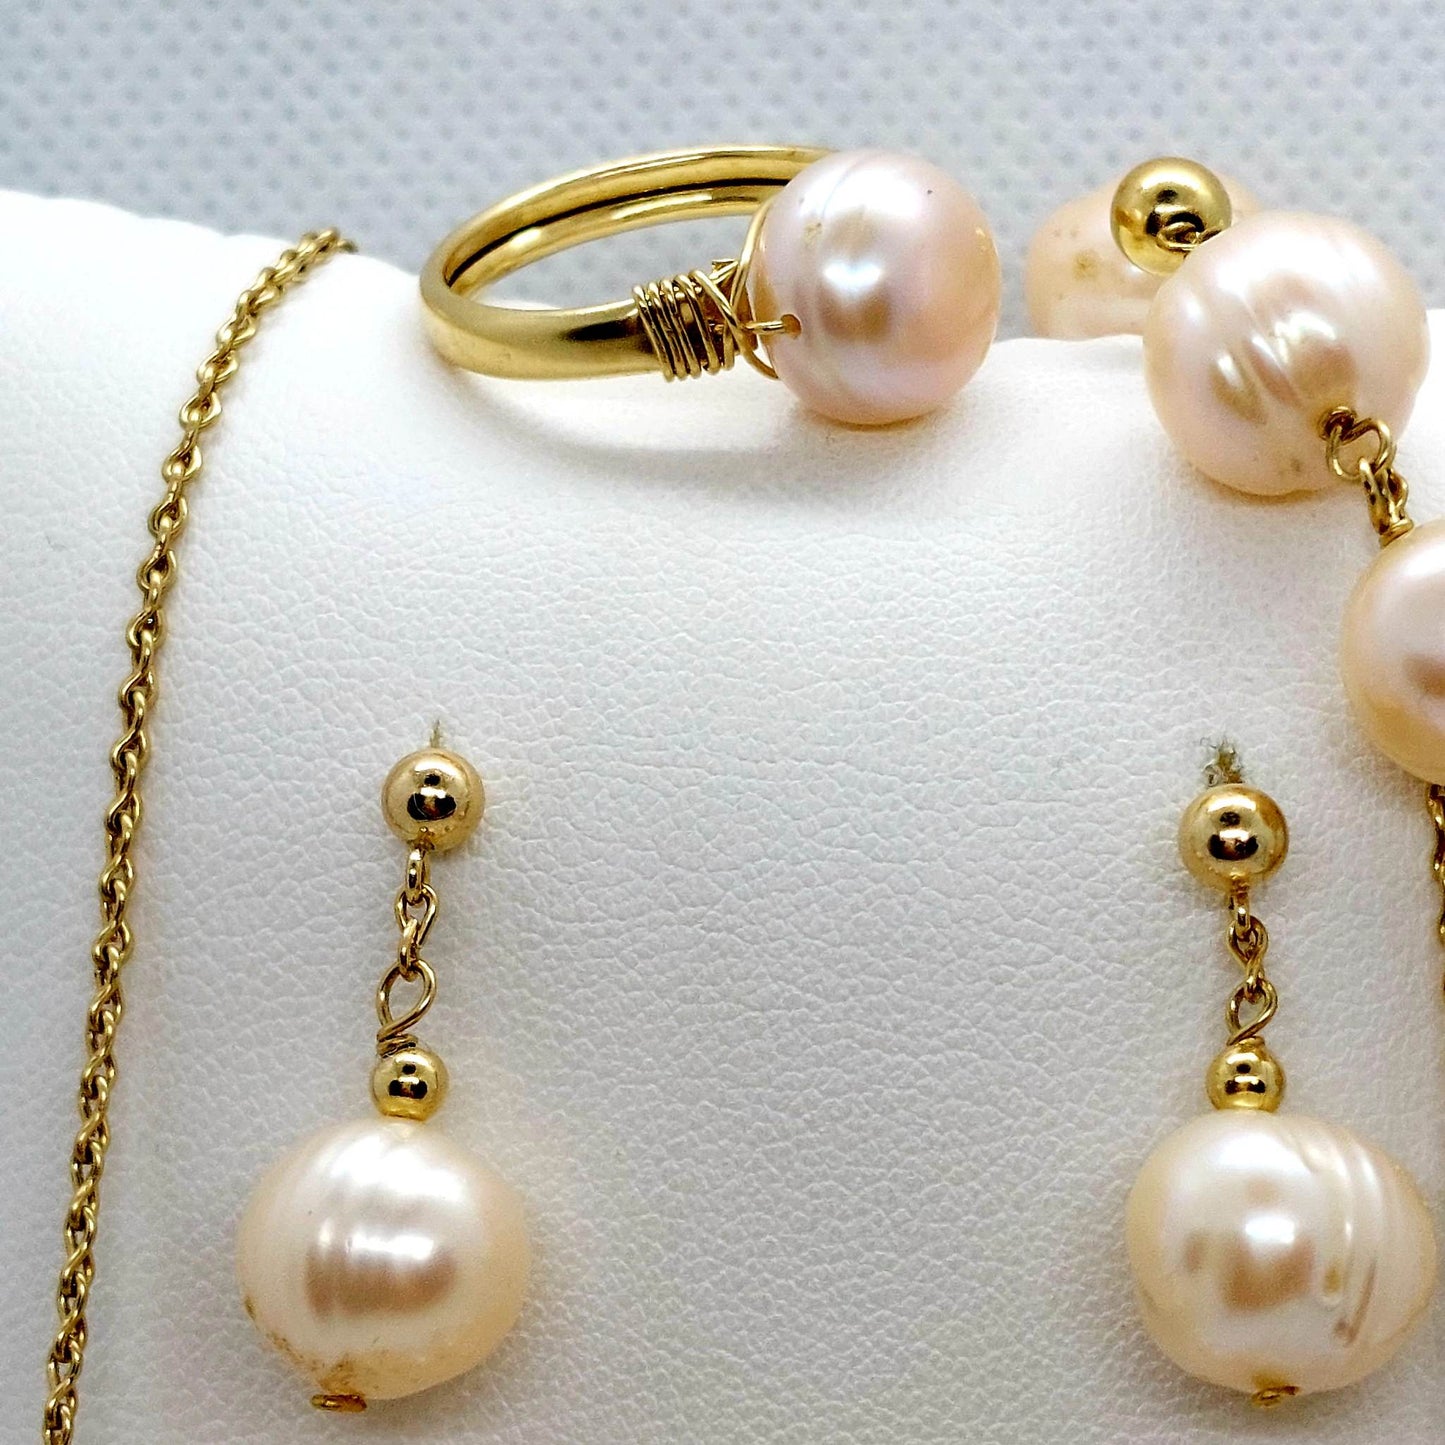 Natural Peach Pearl Jewelry Set - Solid 10K Gold